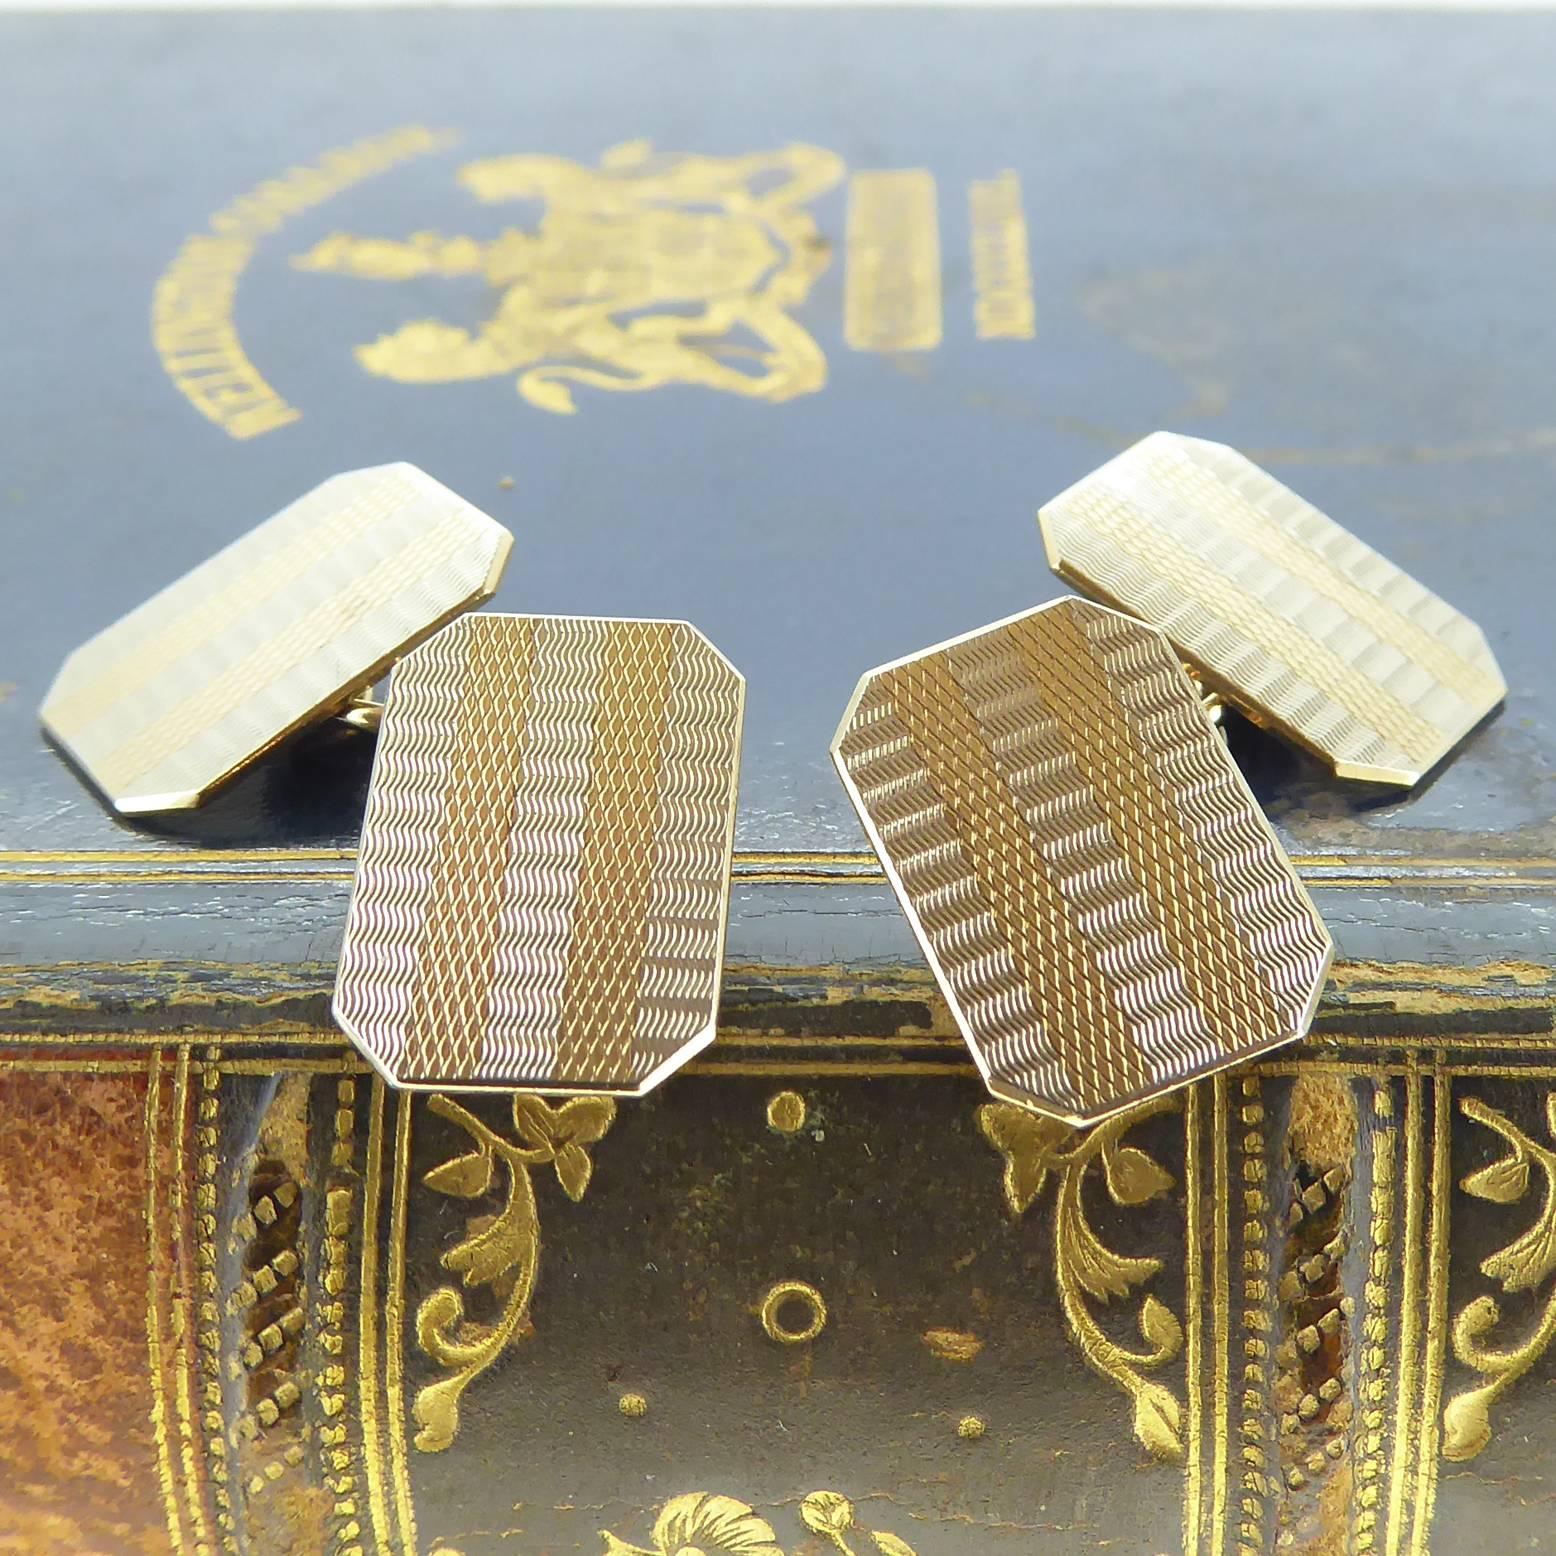 Art Deco Style Cufflinks in Yellow and White Gold, Machine Engraved, circa 1960s 3